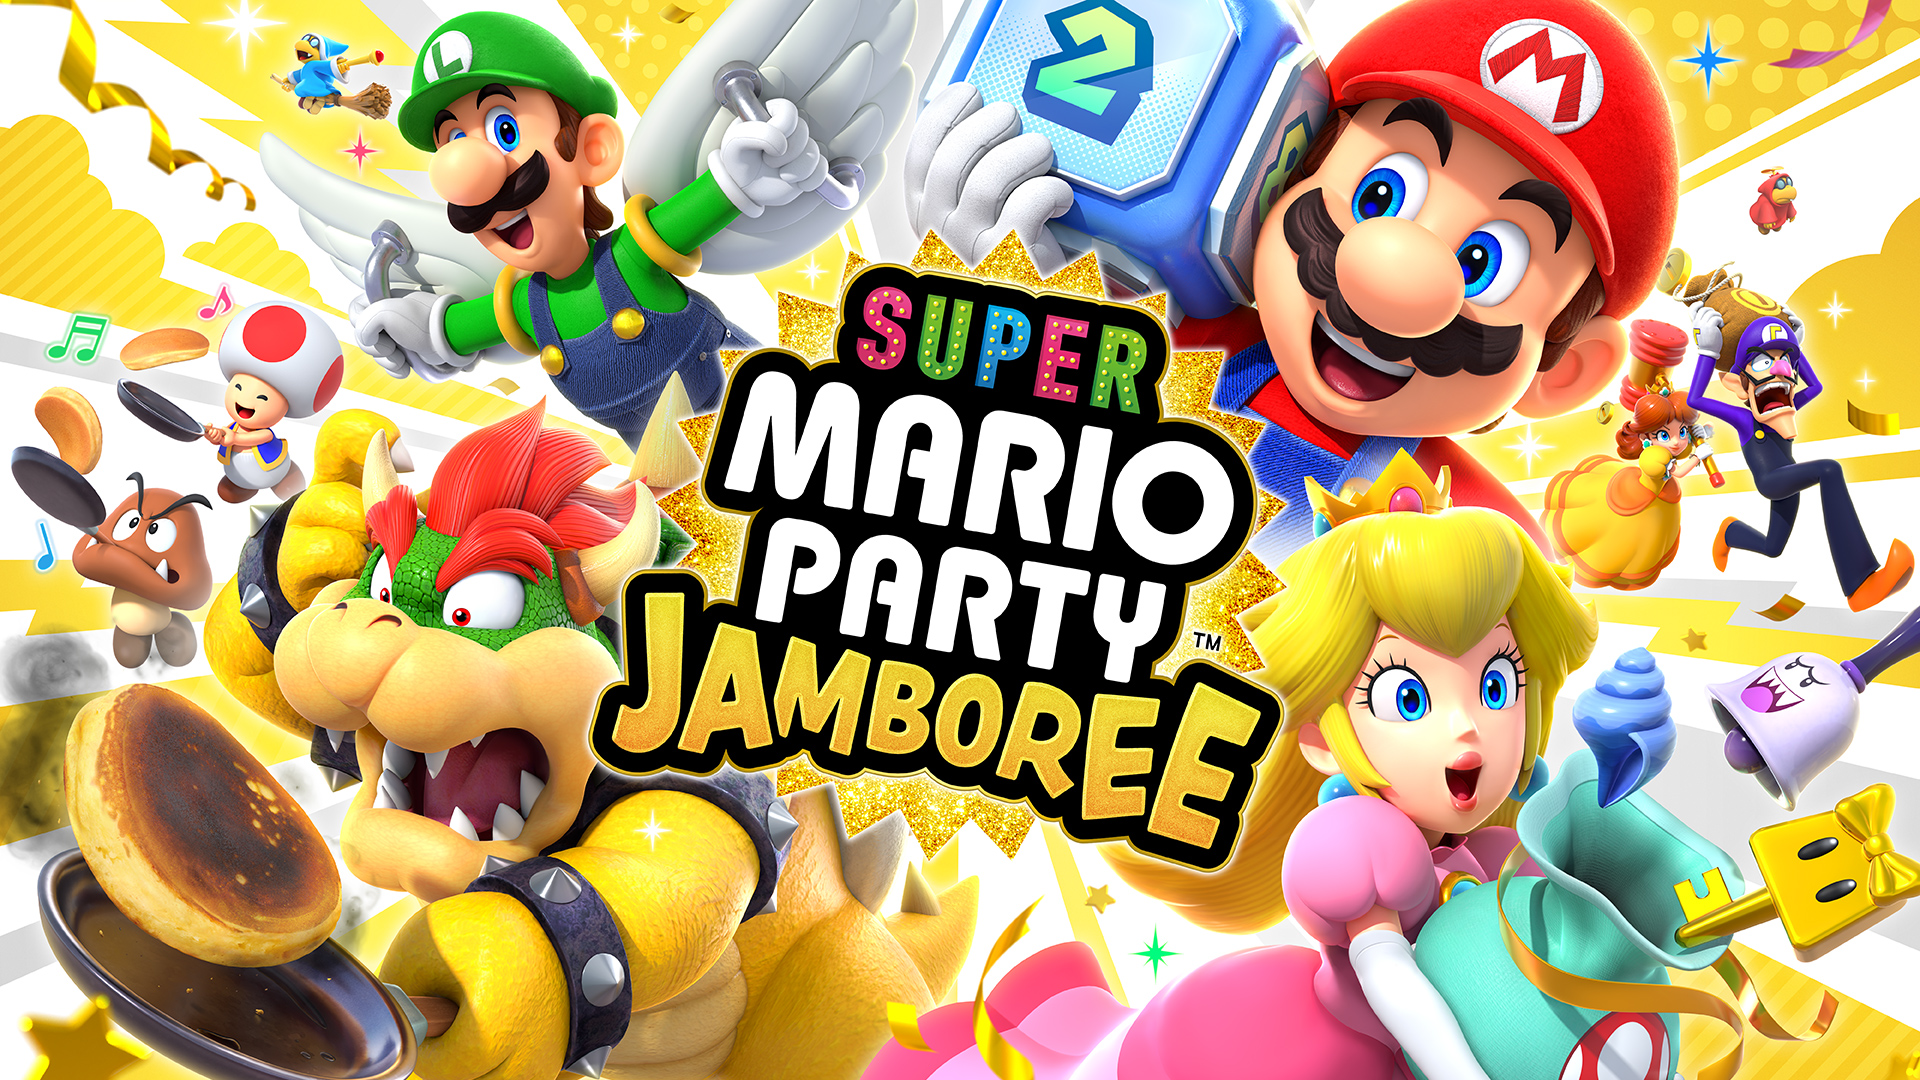 Super Mario Party Jamboree brings over 100 minigames, and 20-person multiplayer